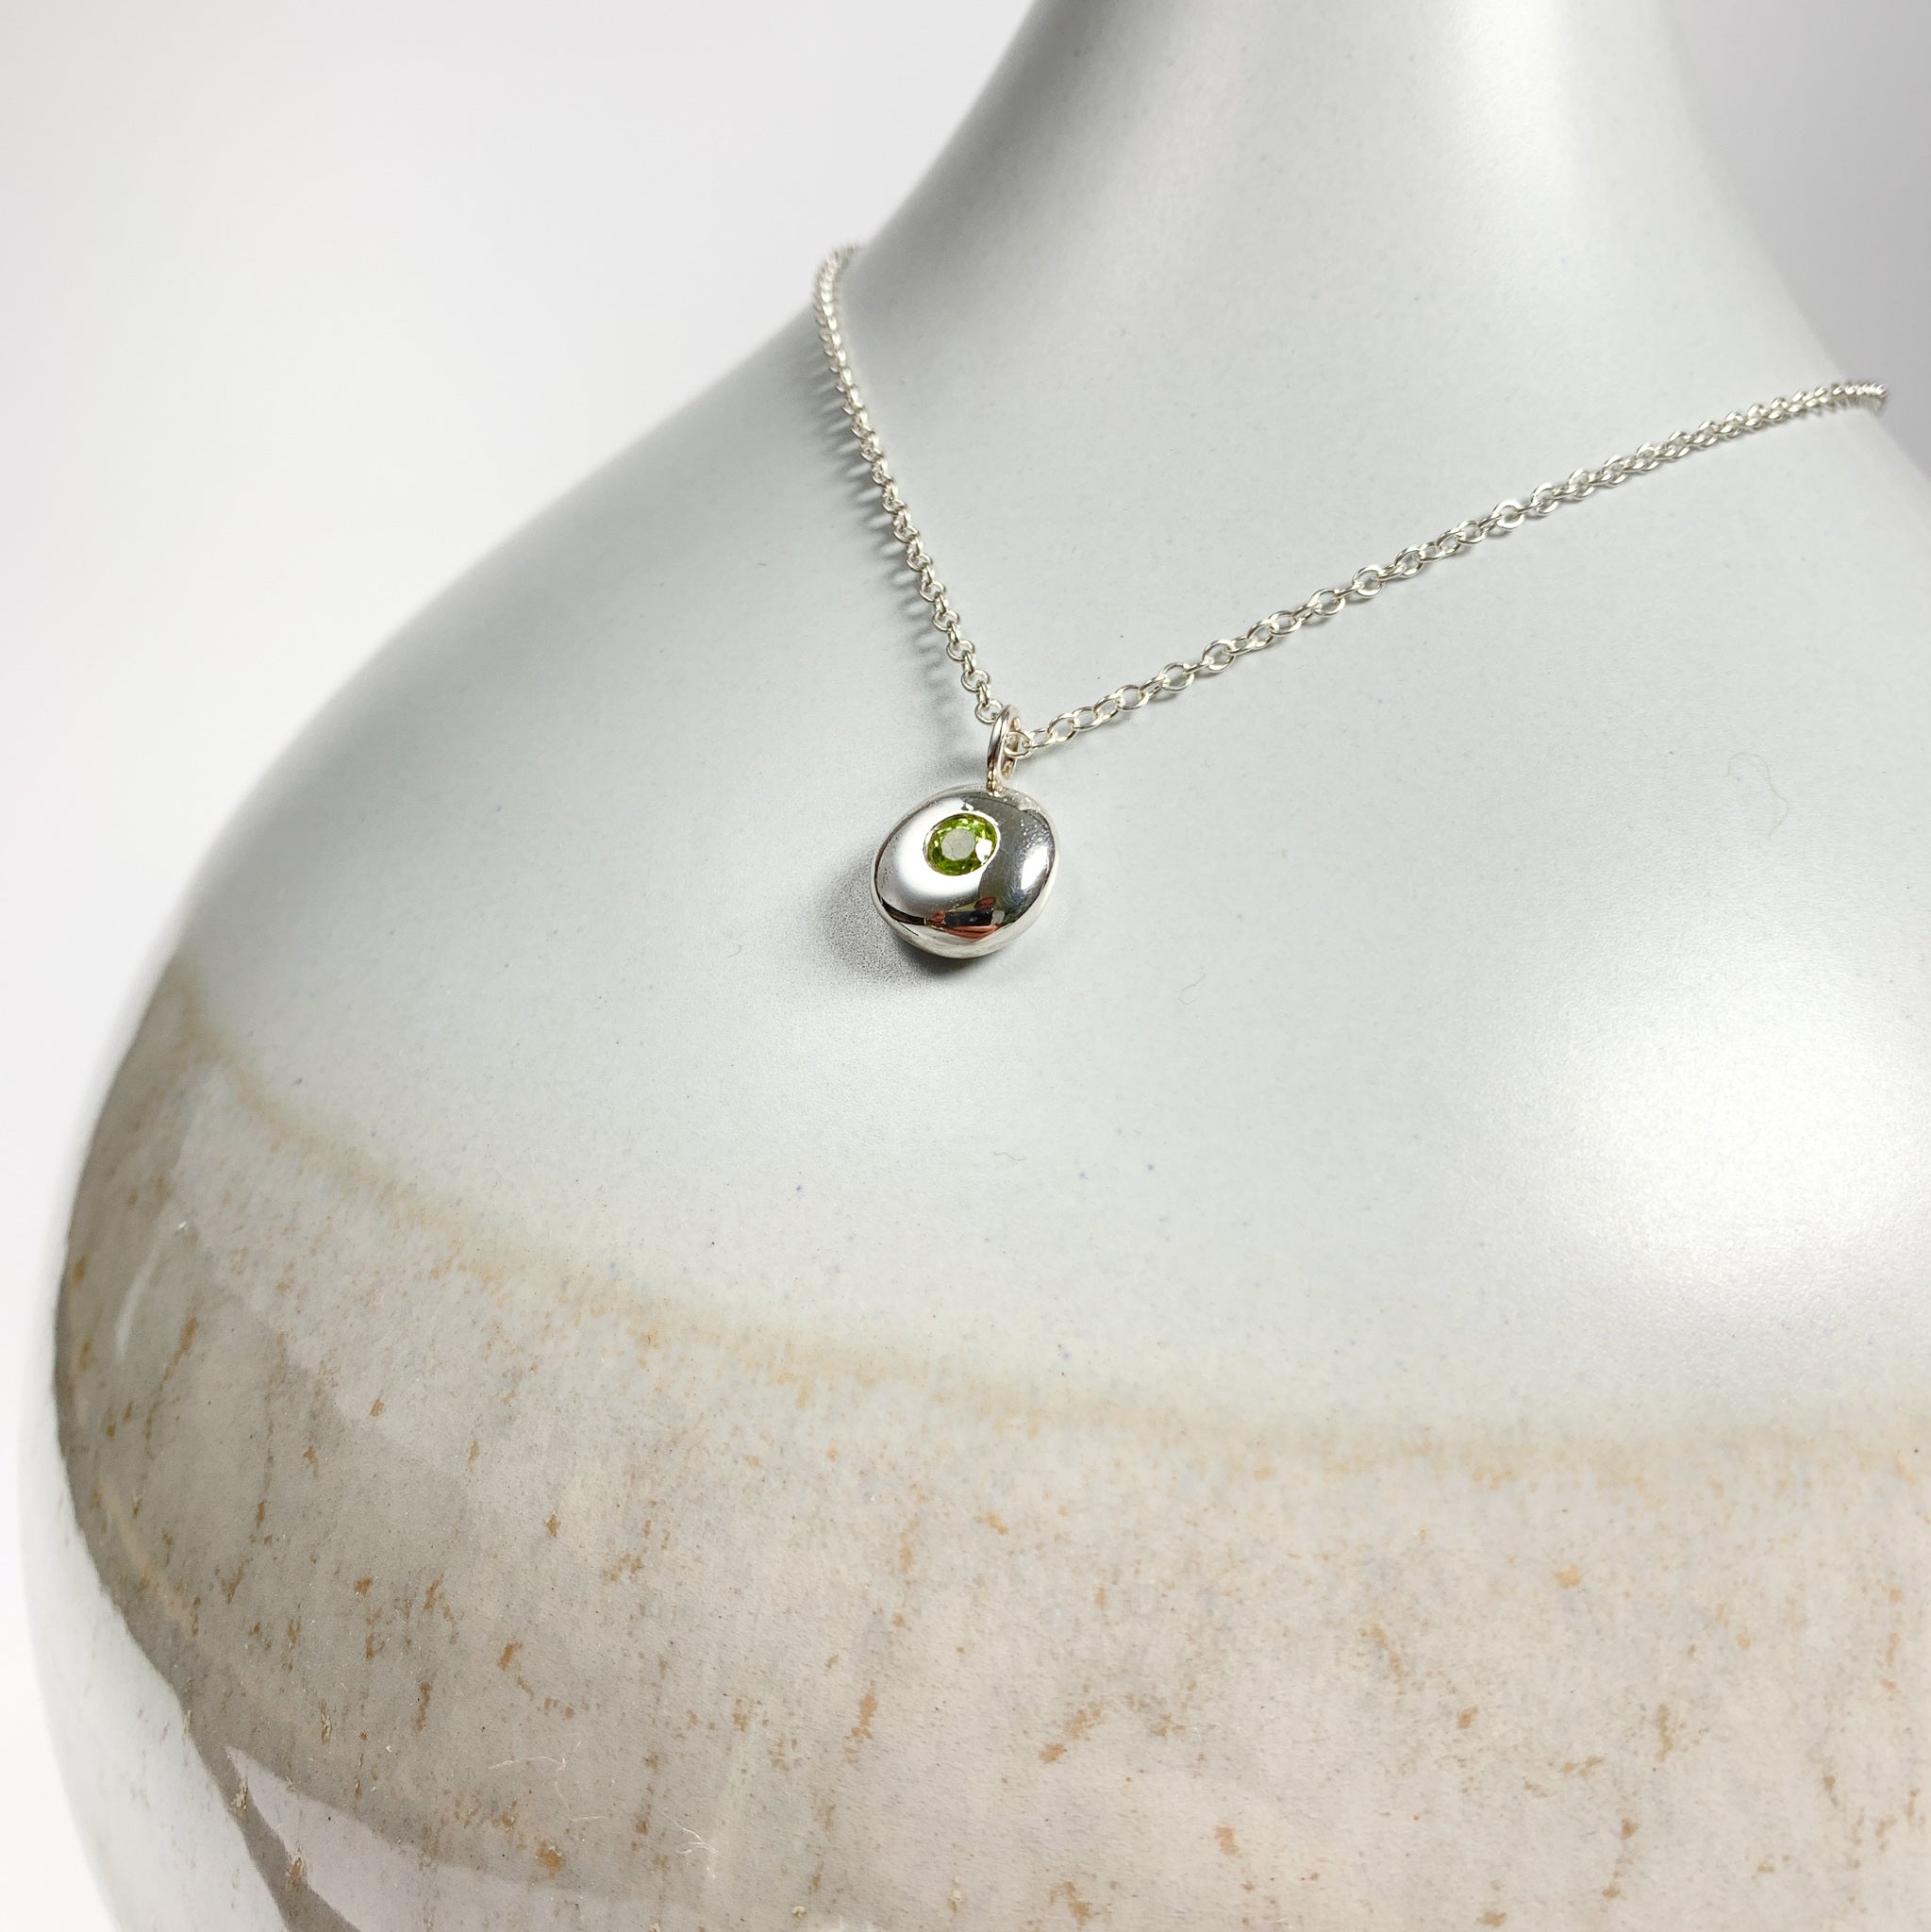 Pebble Charm Sterling Silver Peridot Pendant Necklace